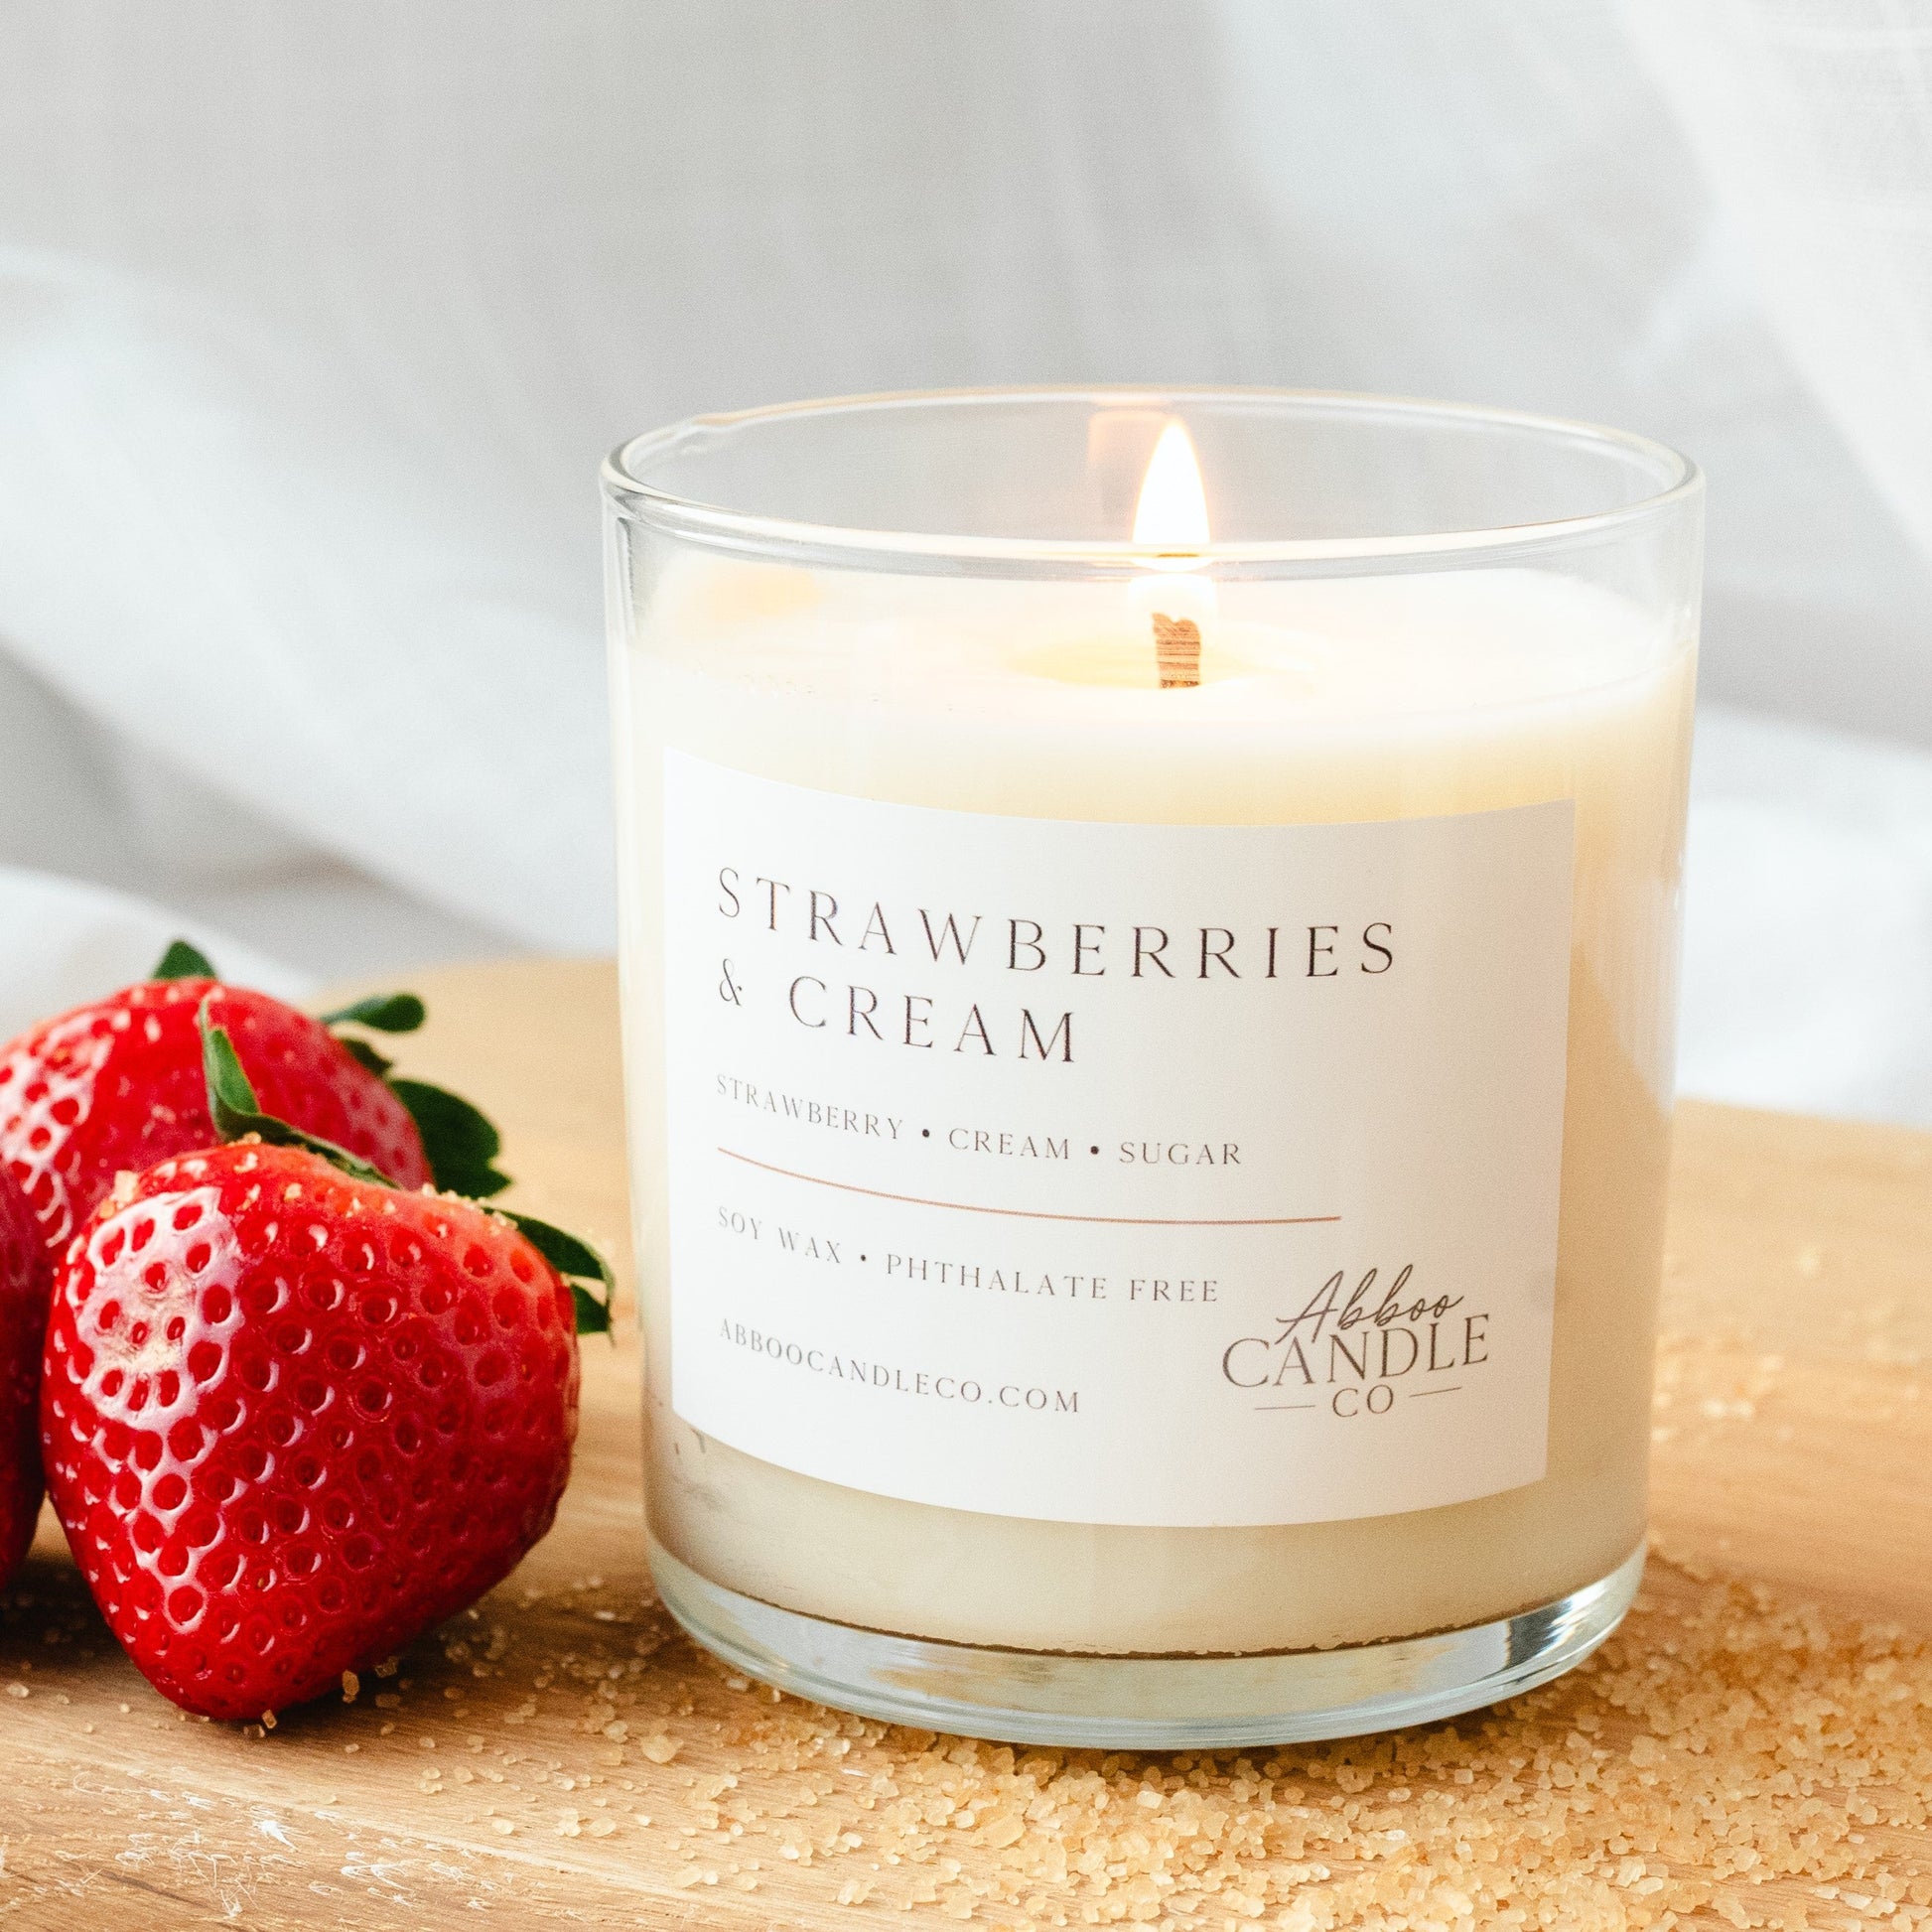 Strawberries and Cream Tumbler Soy Candle - Abboo Candle Co® Wholesale